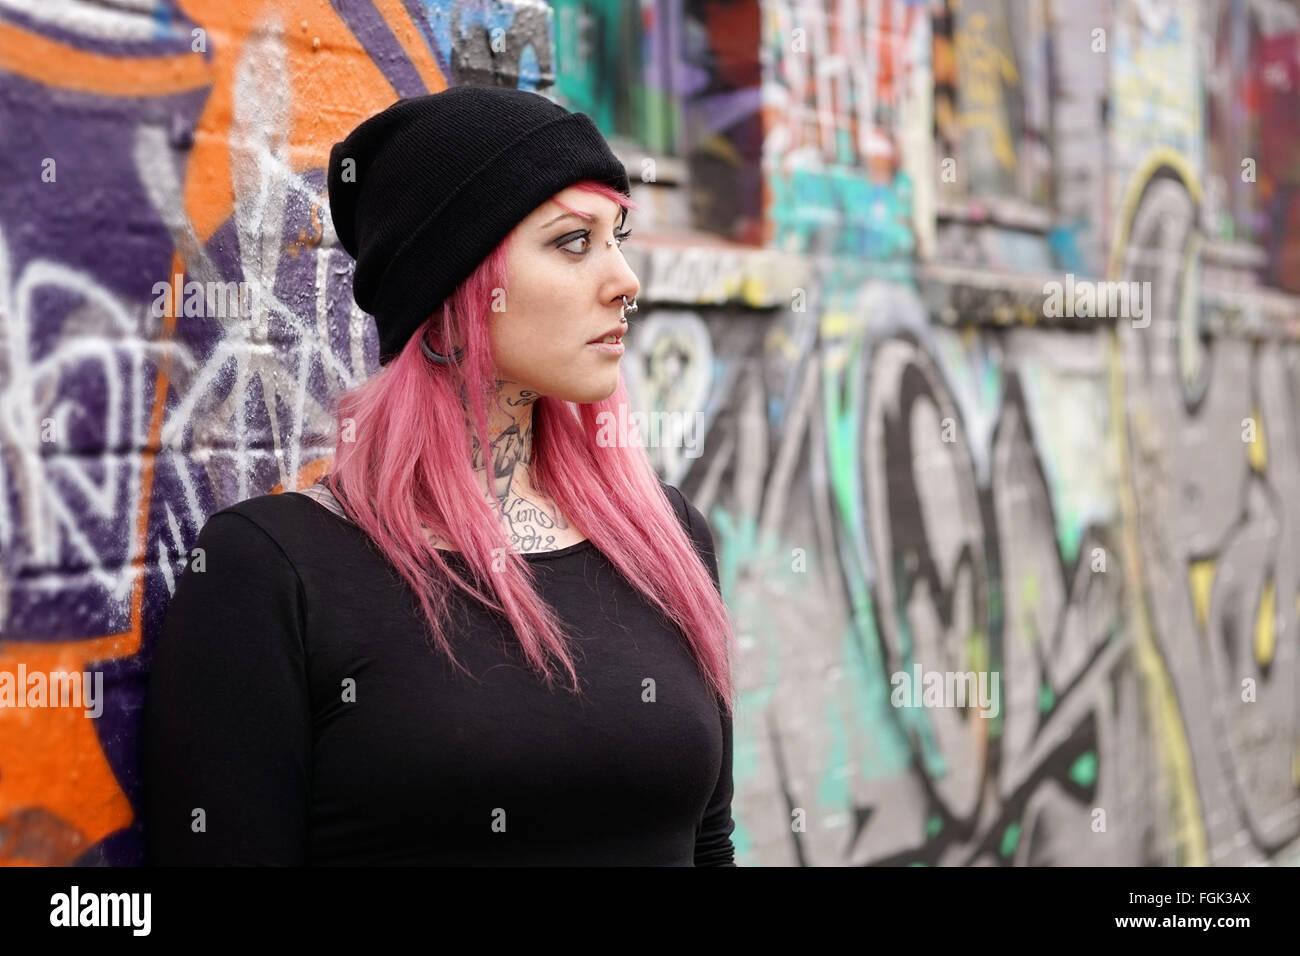 woman with pink hair piercings and tattoos leaning against graffiti wall Stock Photo